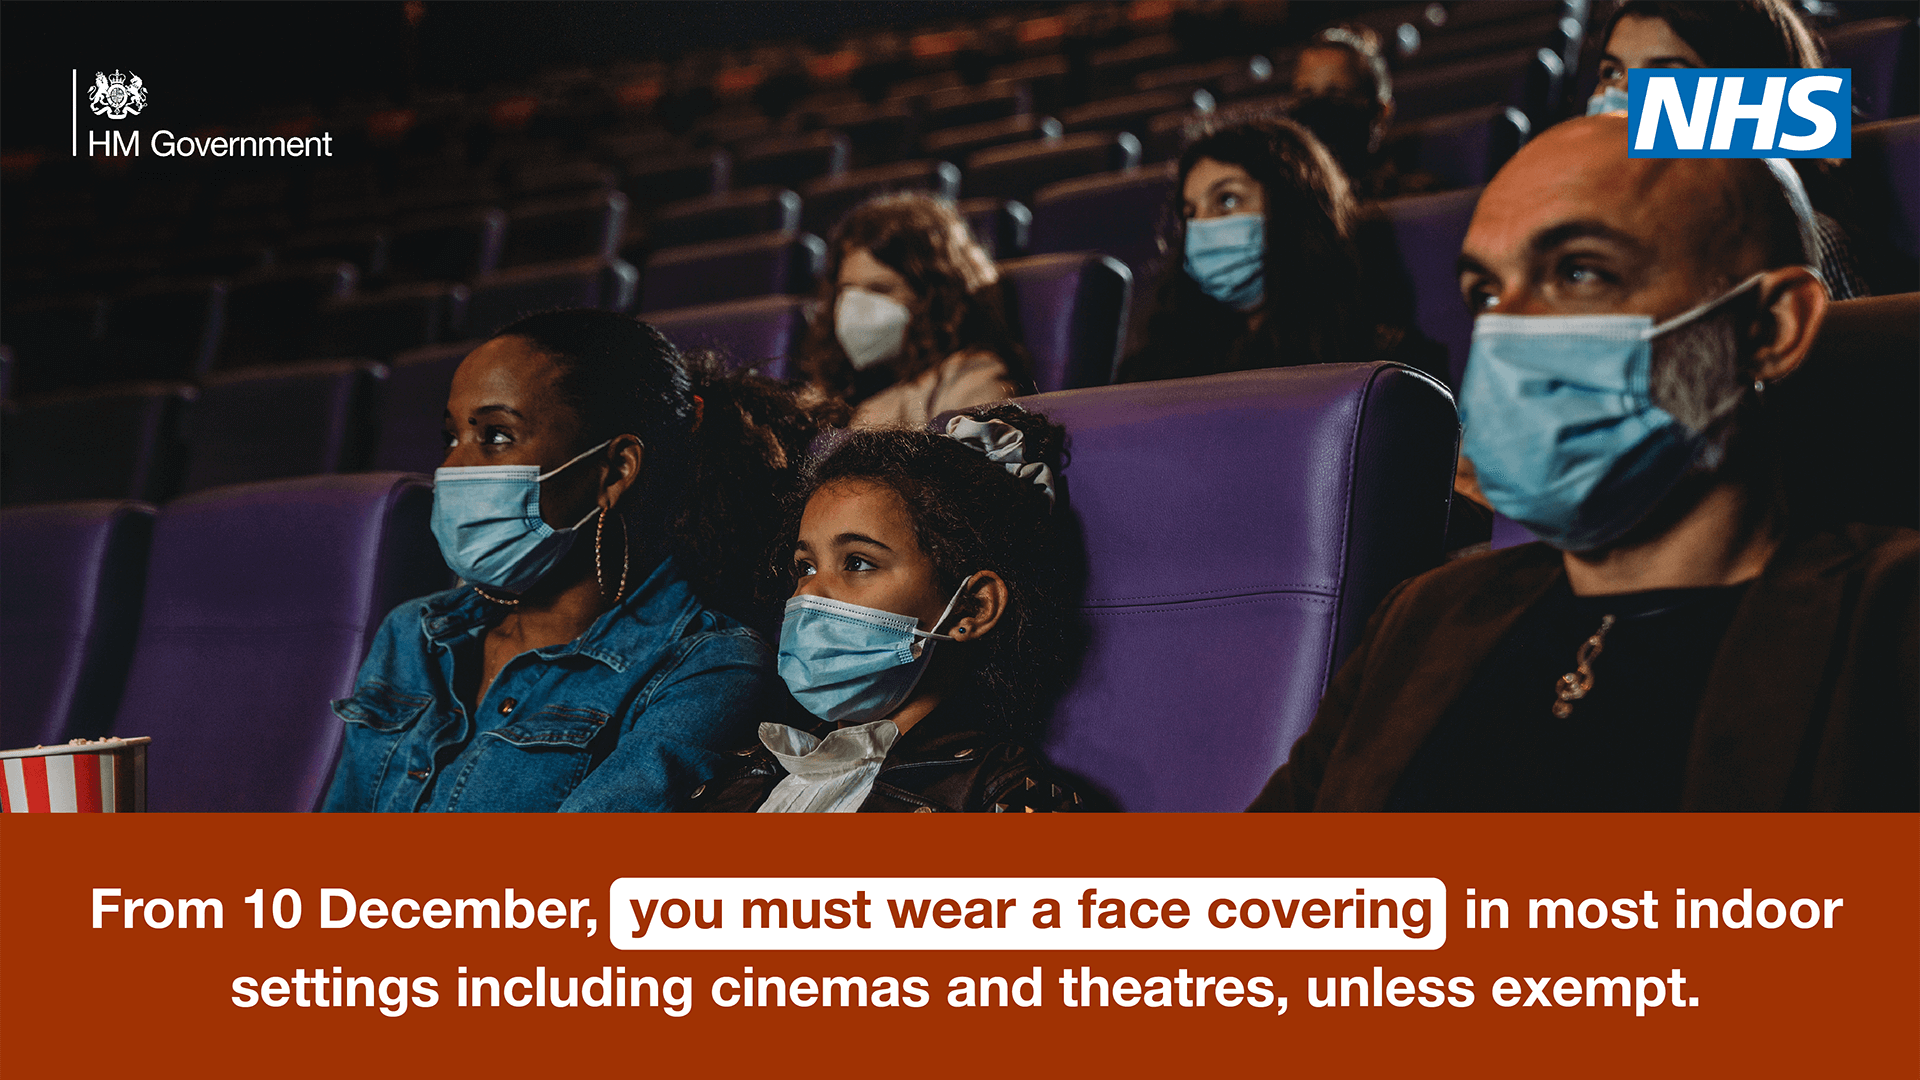 You must wear a face covering in most indoor settings